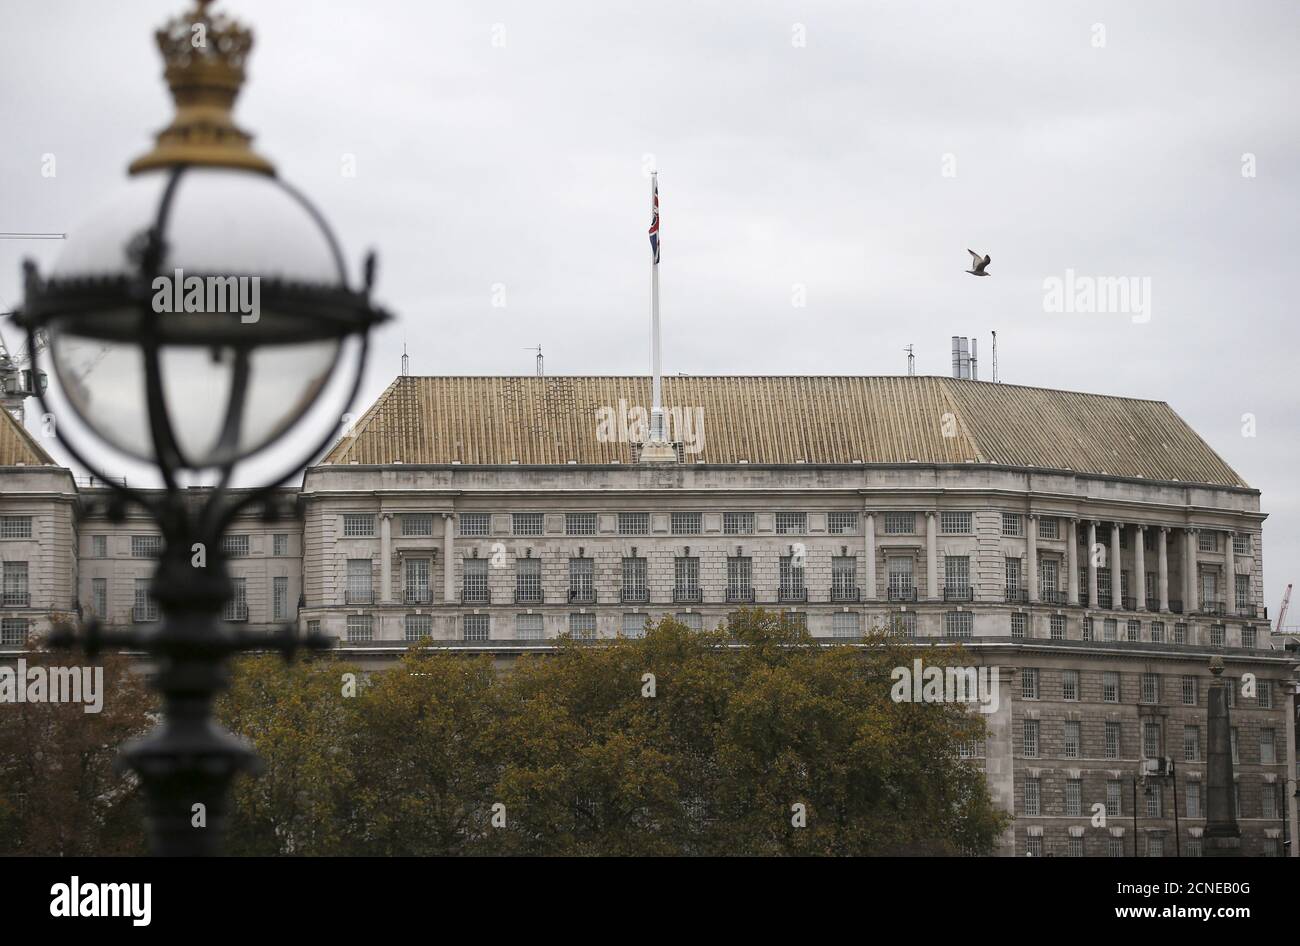 Thames House, the headquarters of the British Security Service (MI5) is seen in London, Britain October 22, 2015. Have you heard the one about the lord, the gangster and the prime minister's wife? An old scandal from the 1960s re-emerges in lurid new detail from declassified British intelligence files featuring prominent politician Lord Boothby, his mistress, who was the wife of Prime Minister Harold Macmillan, and notorious racketeer Ronnie Kray. They reveal that Kray had procured Boothby with a young gay lover, that Kray and Boothby were both 'hunters of young men' who had attended illicit p Stock Photo